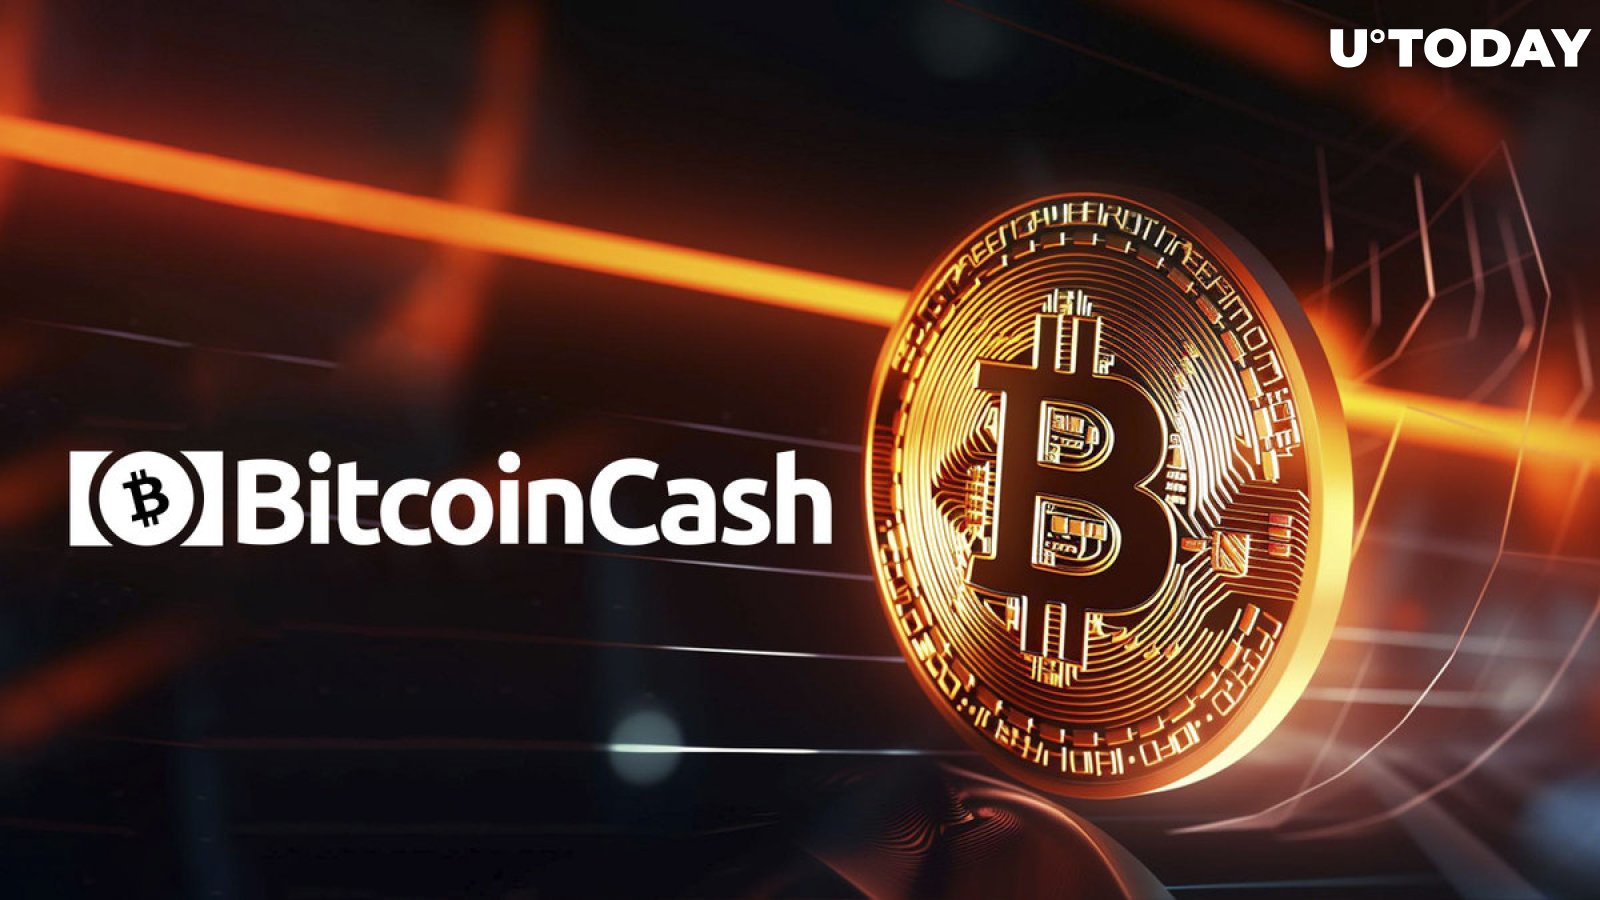 Bitcoin (BTC), Bitcoin Cash (BCH) Set for Epic Countdowns to Halving Event